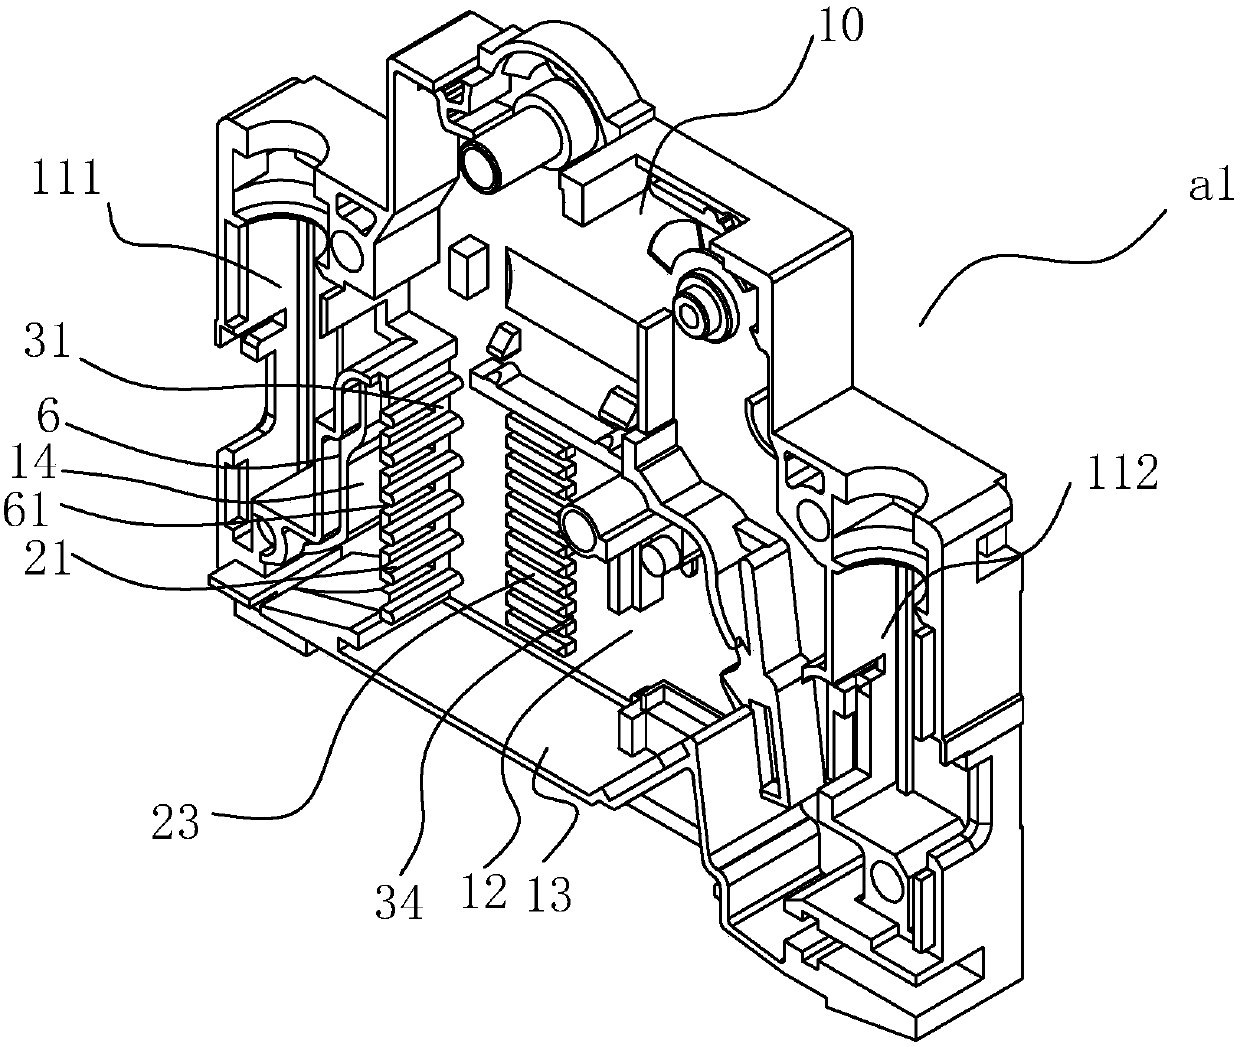 Circuit breaker shell and circuit breaker equipped with same